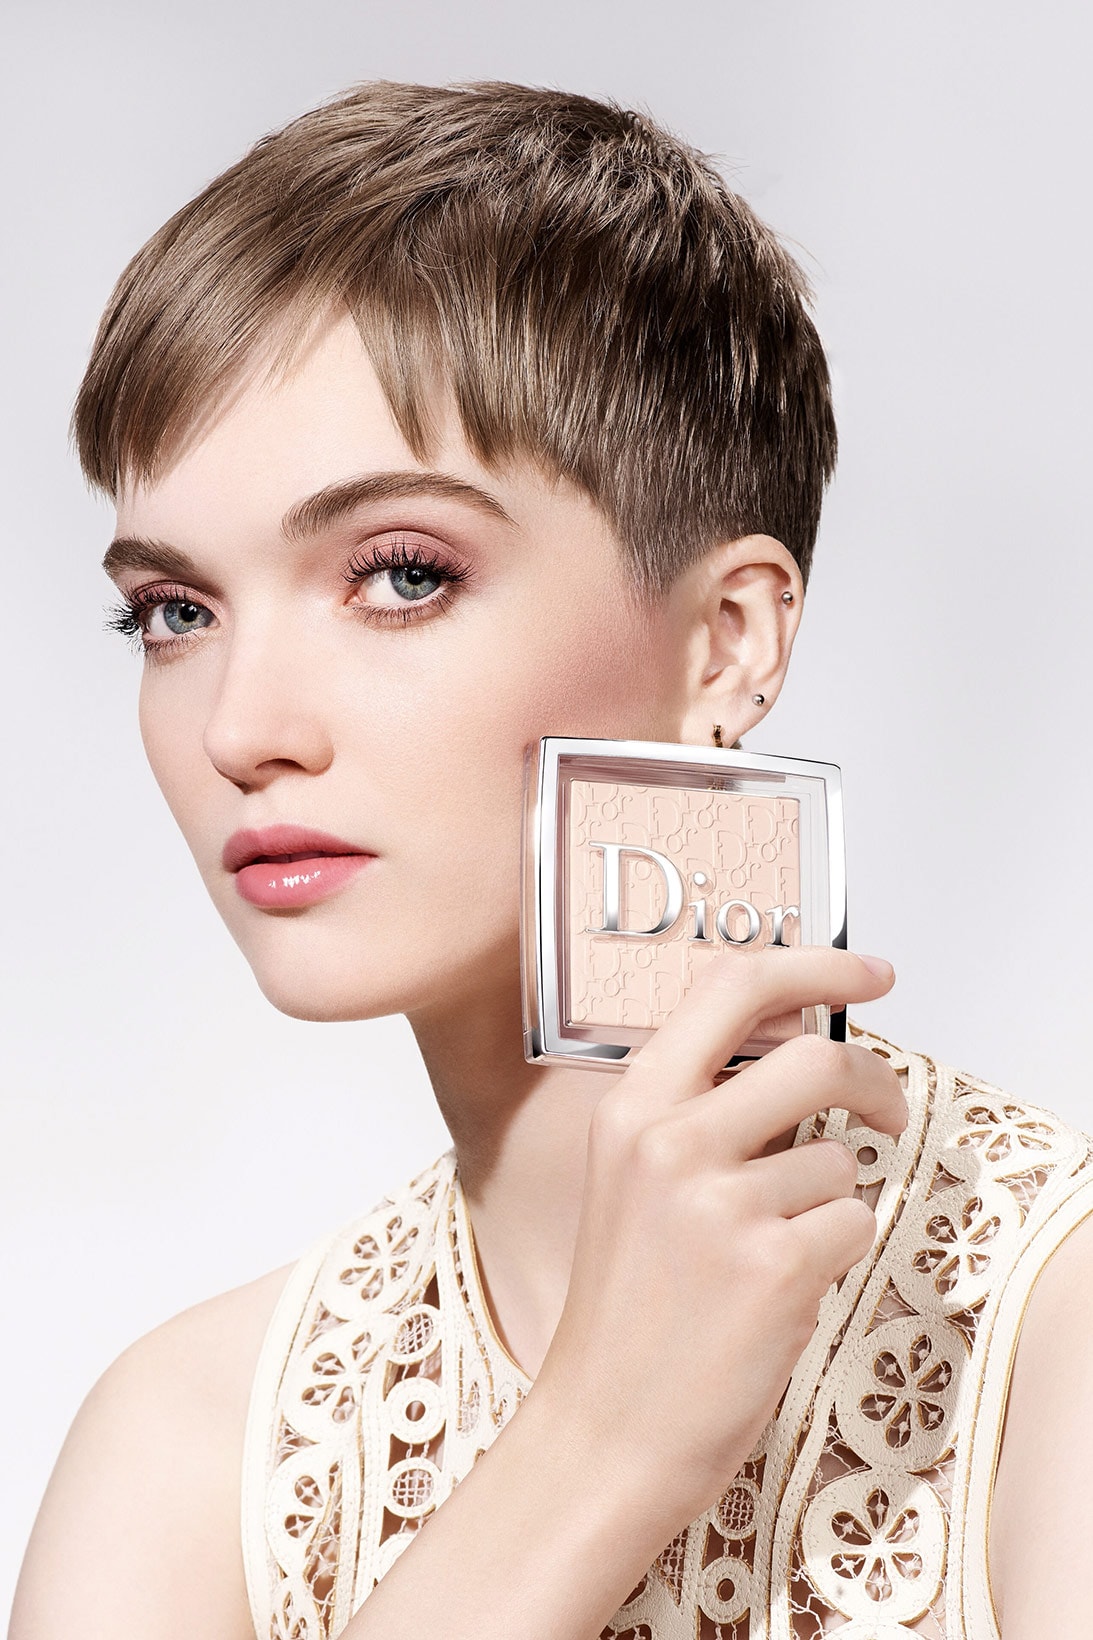 dior beauty face and body powder foundation makeup peter philips ruth bell